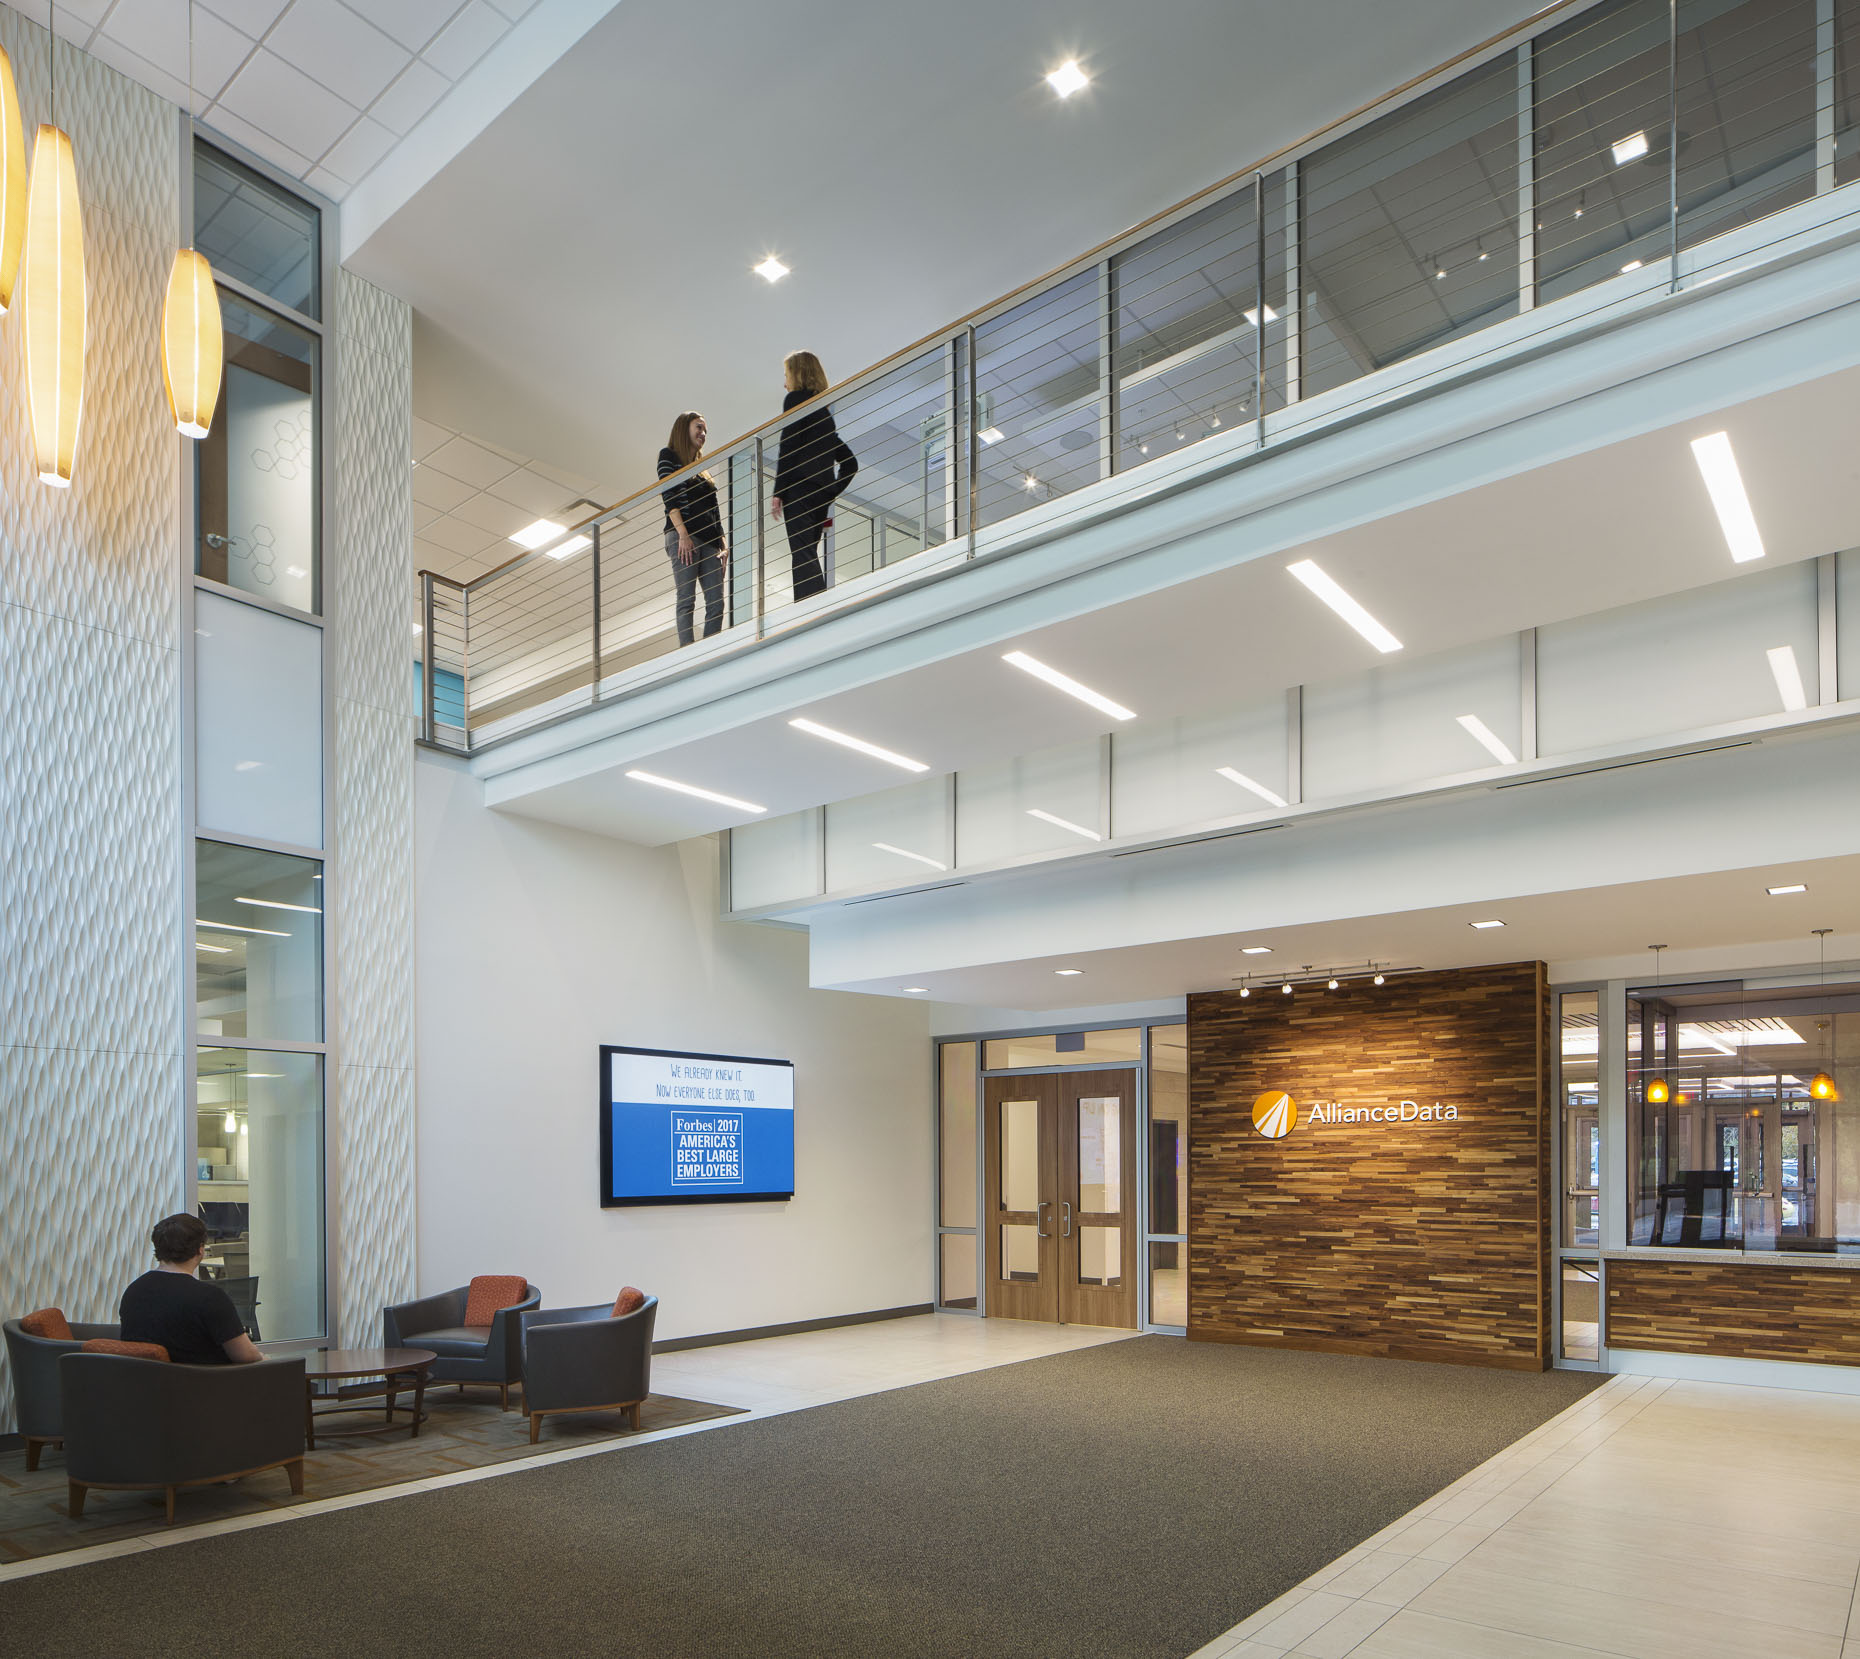 Alliance Data Systems by Moody Nolan photographed by Lauren K Davis based in Columbus, Ohio